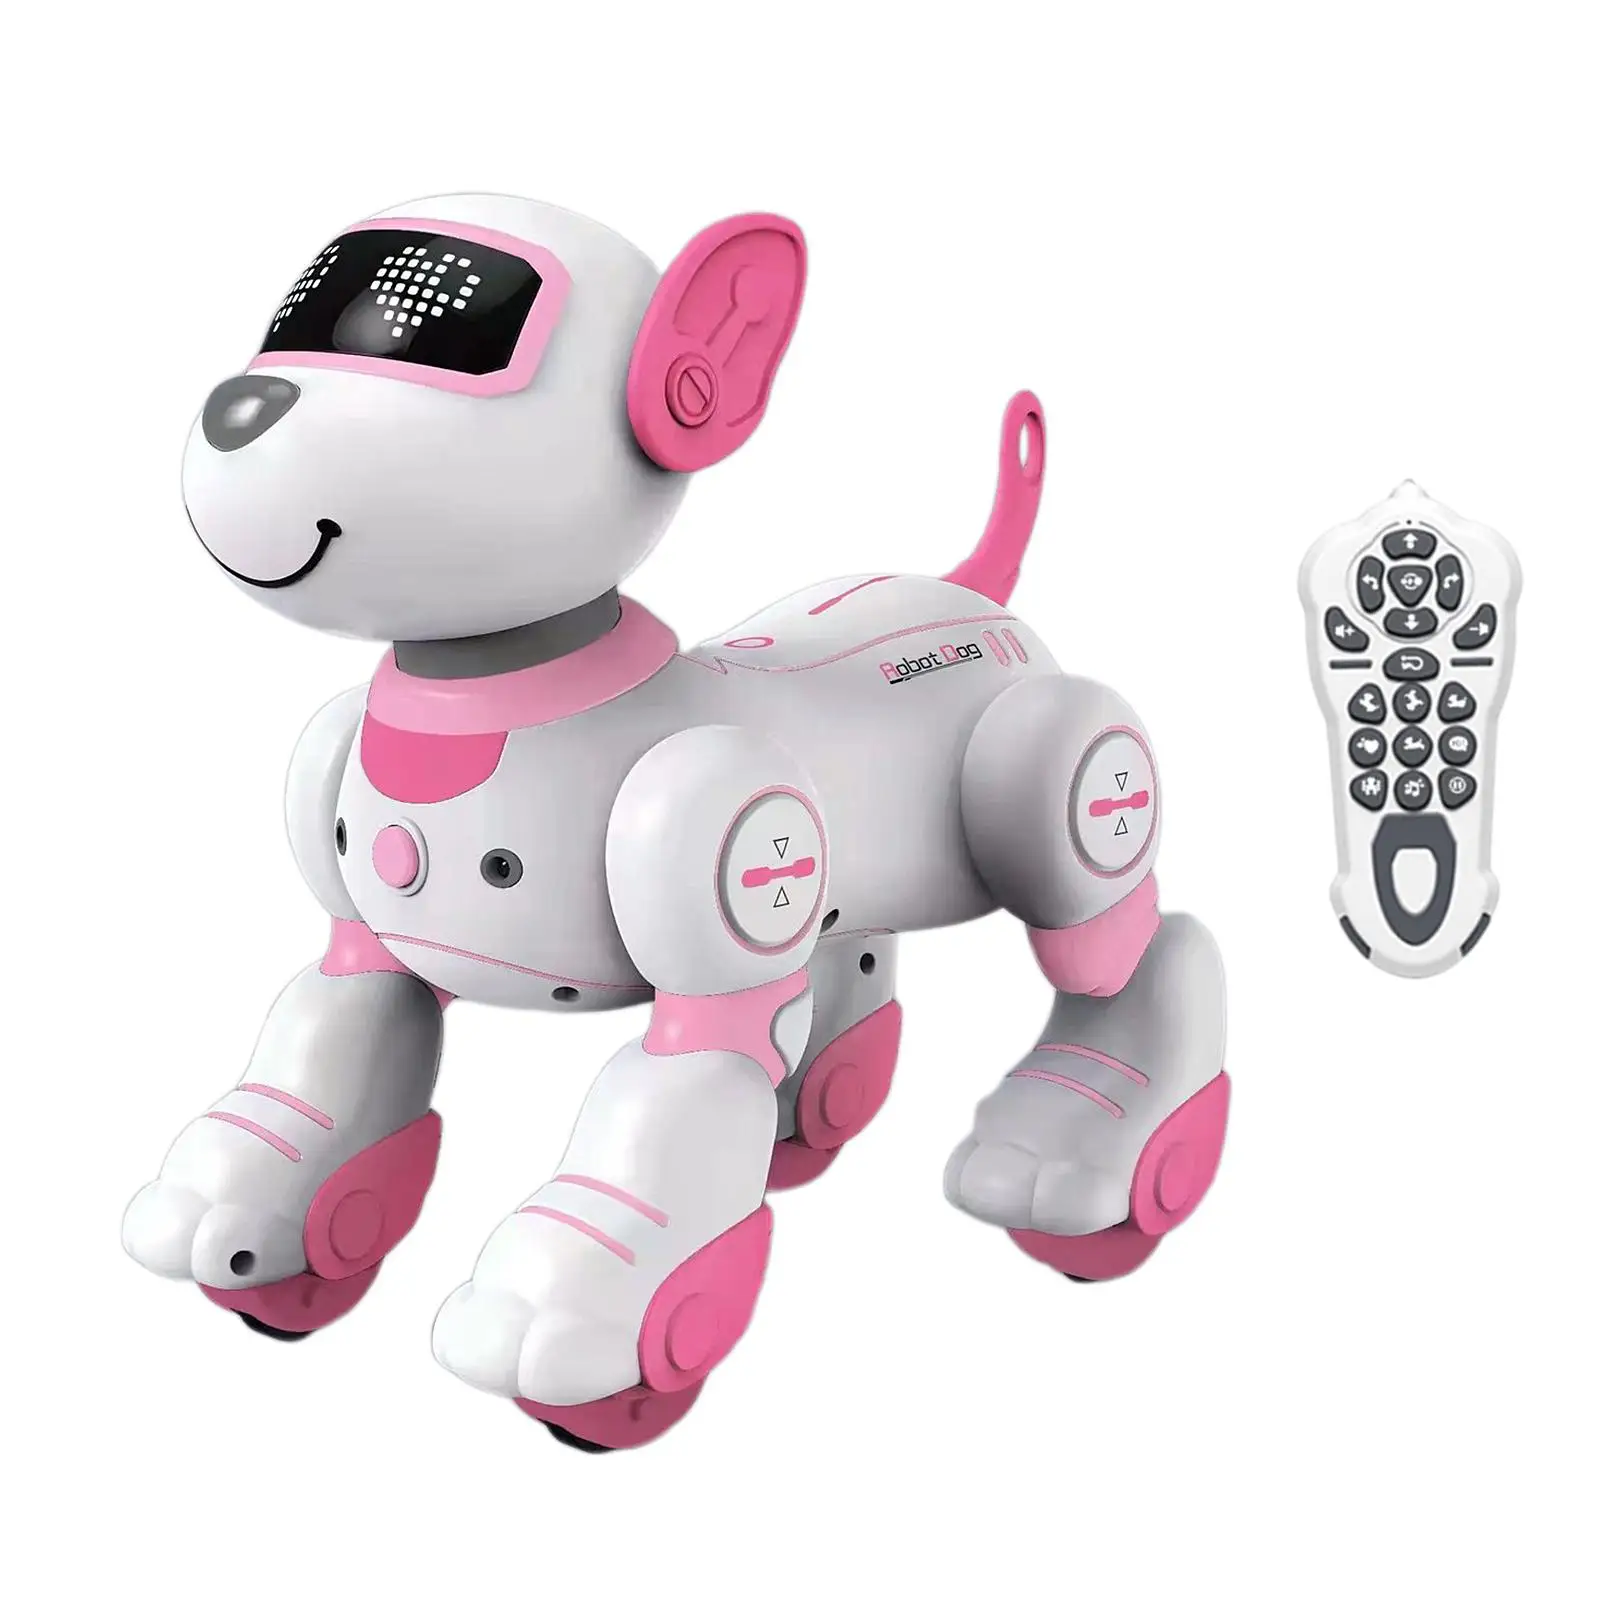 Remote Control Robot Dog Toy Toys Remote Control Smart for Boys Girls